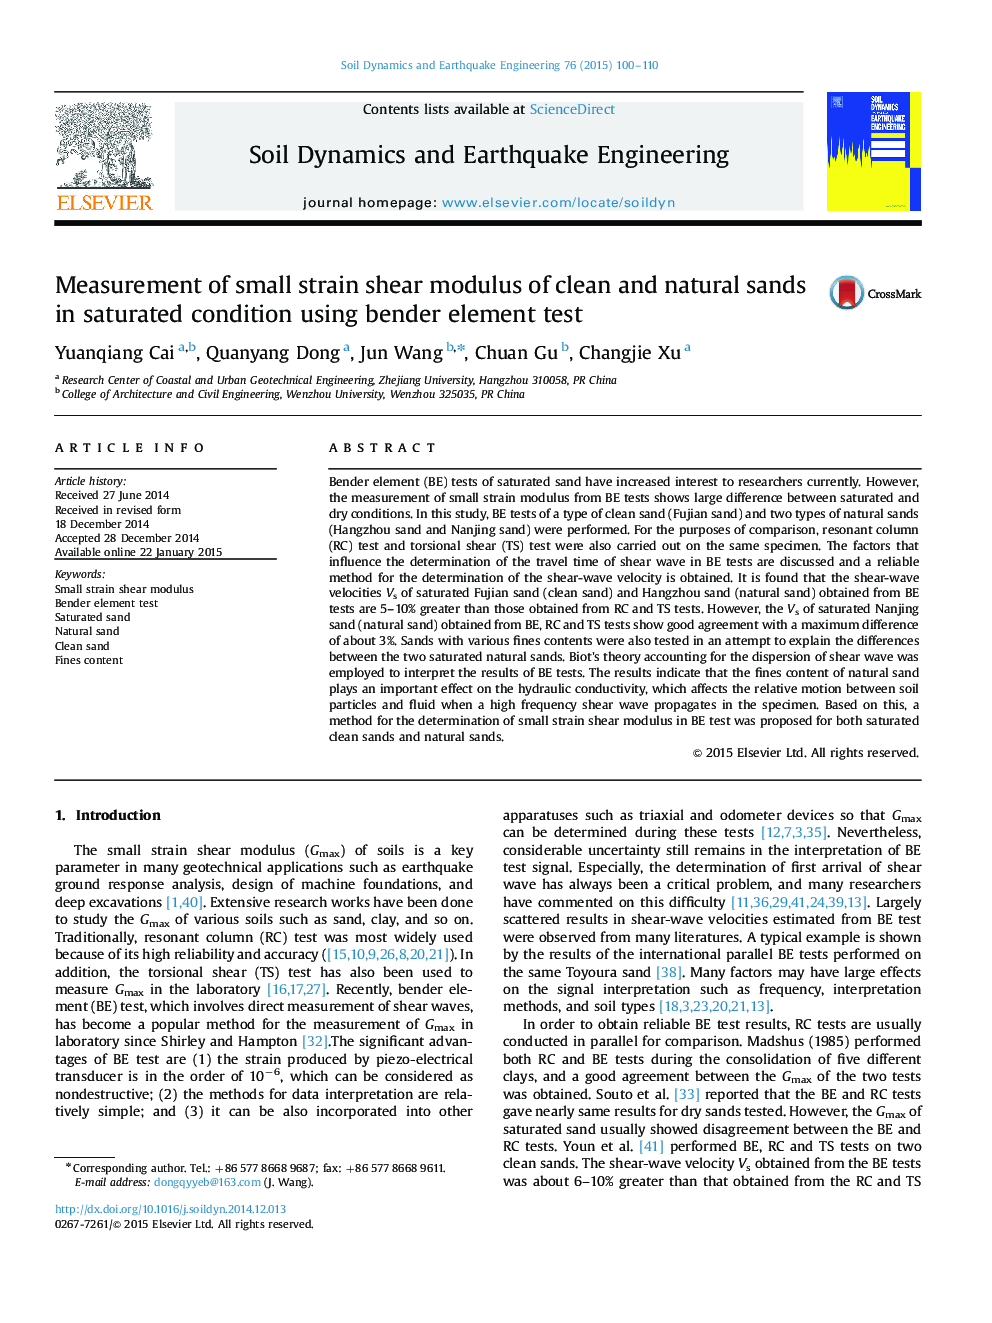 Measurement of small strain shear modulus of clean and natural sands in saturated condition using bender element test